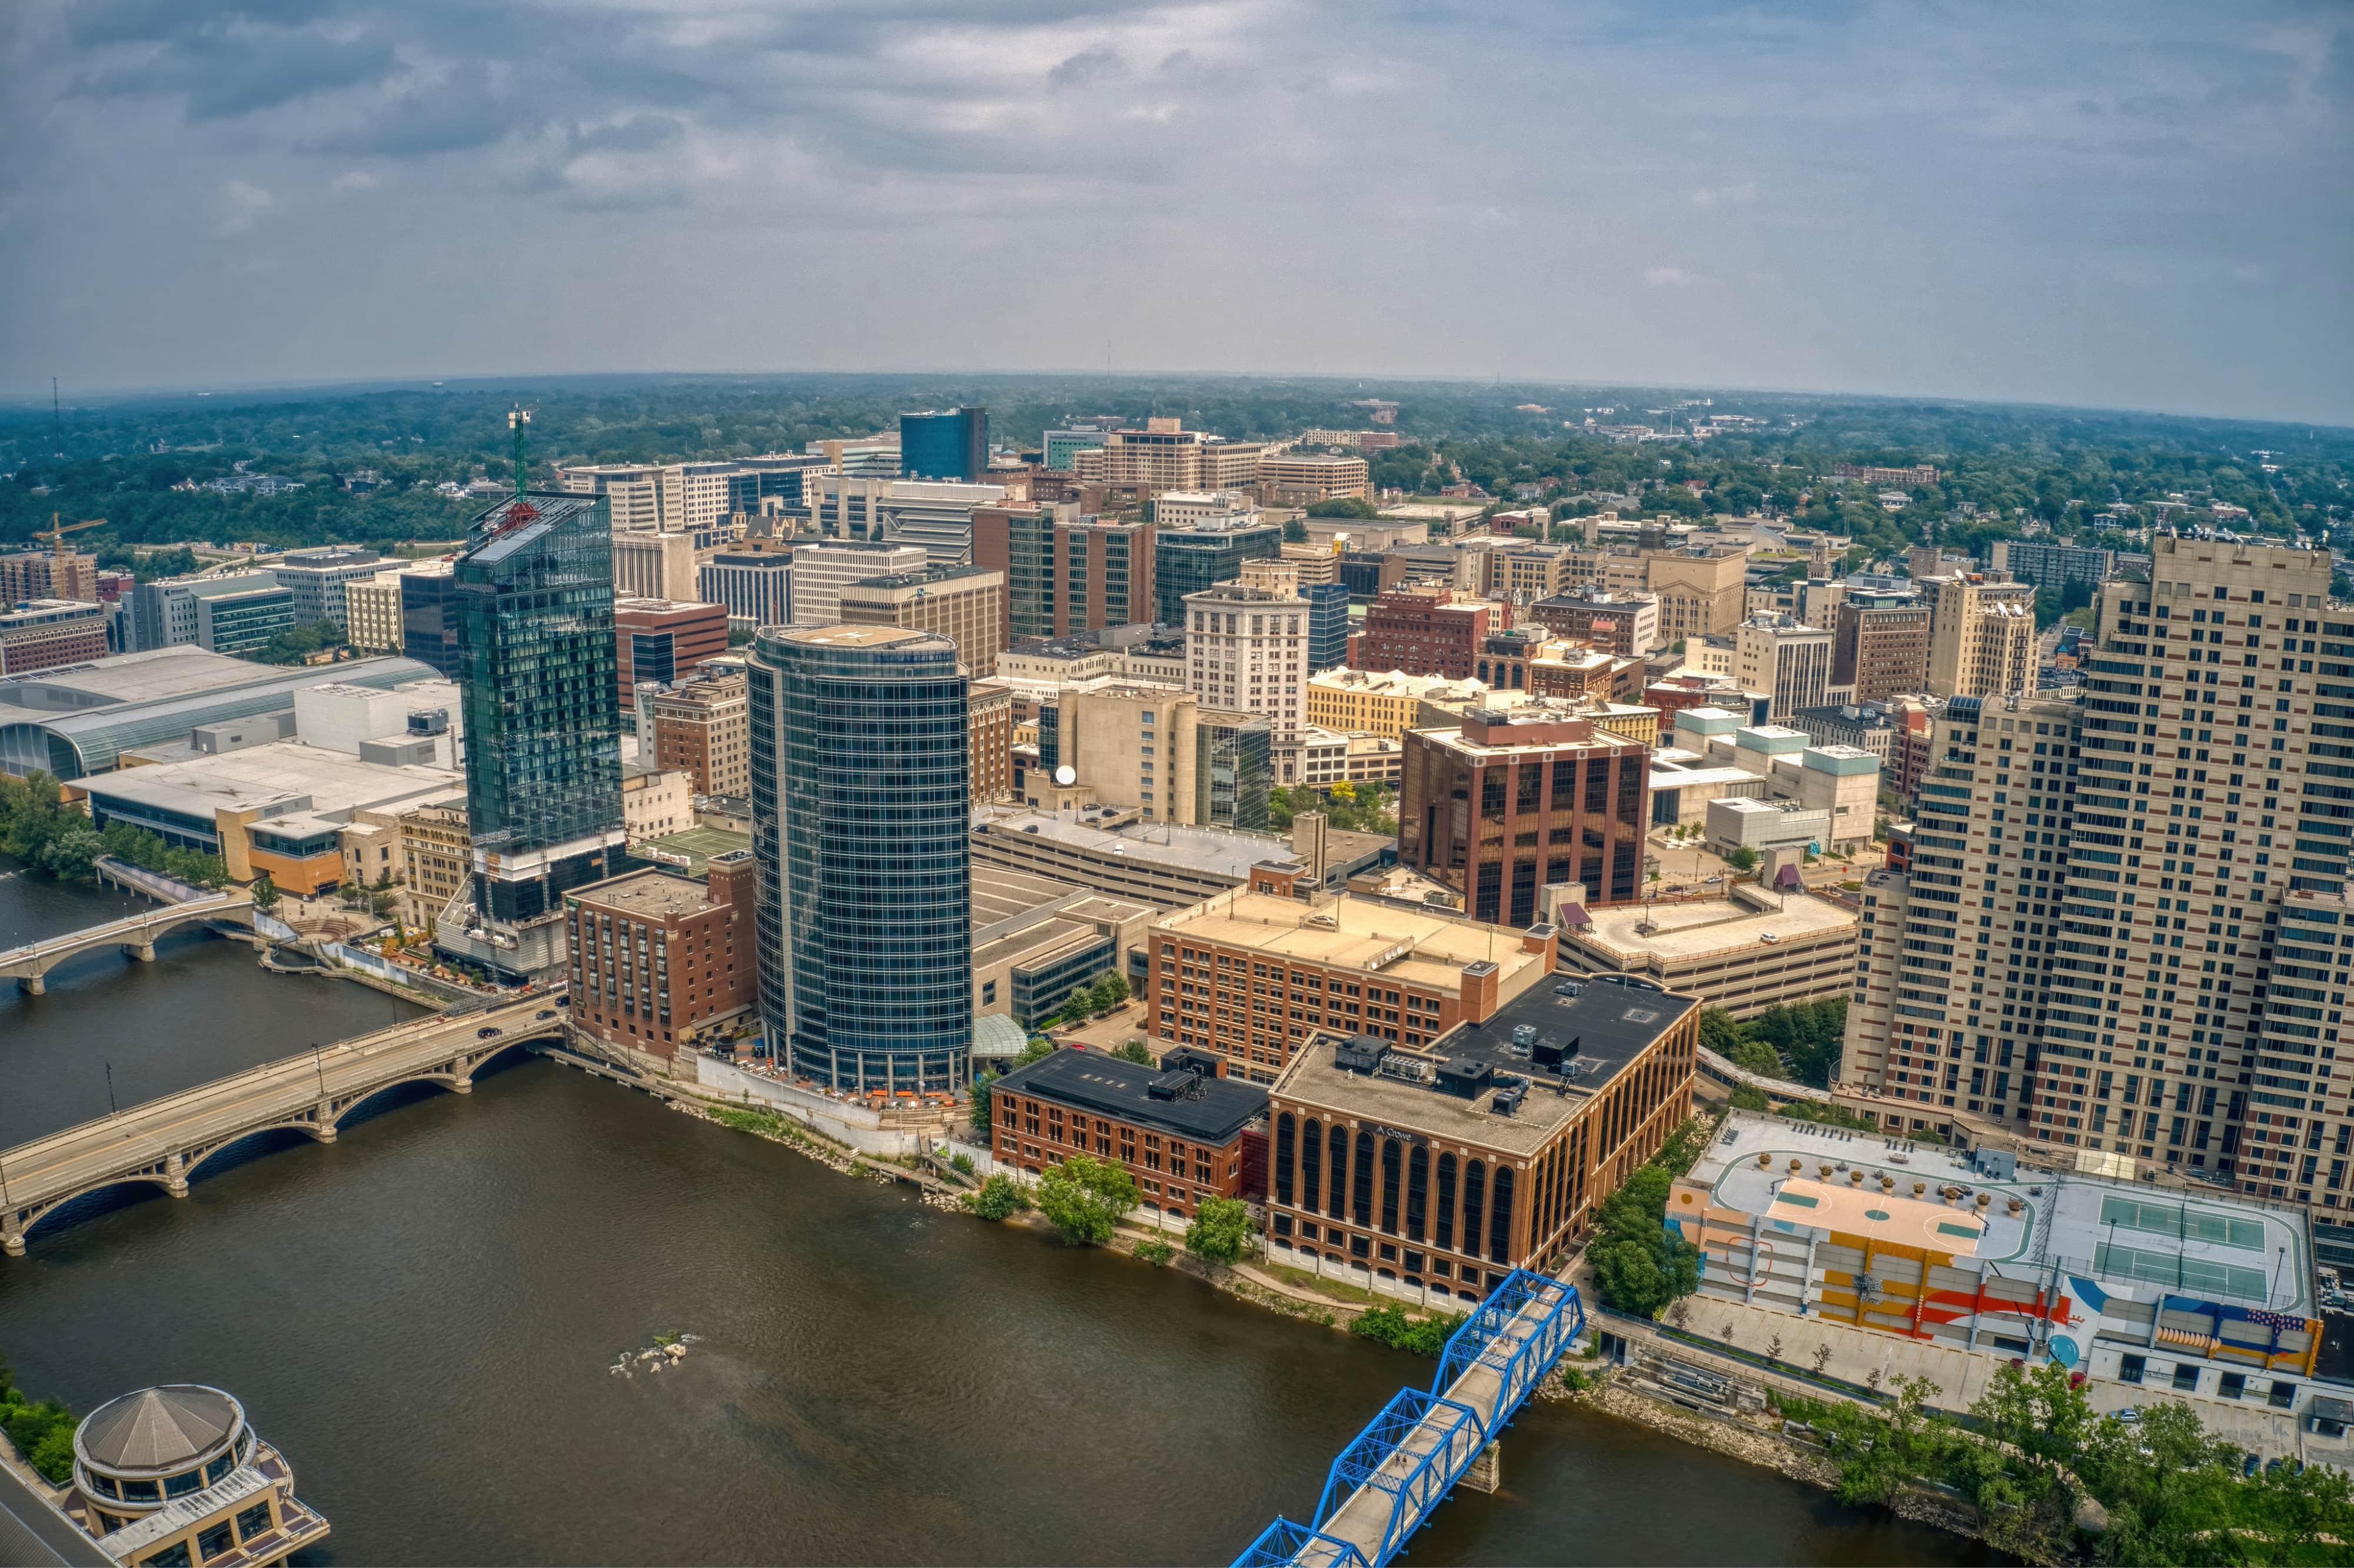 Aerial View of Downtown Grand Rapids, Michigan during Summer